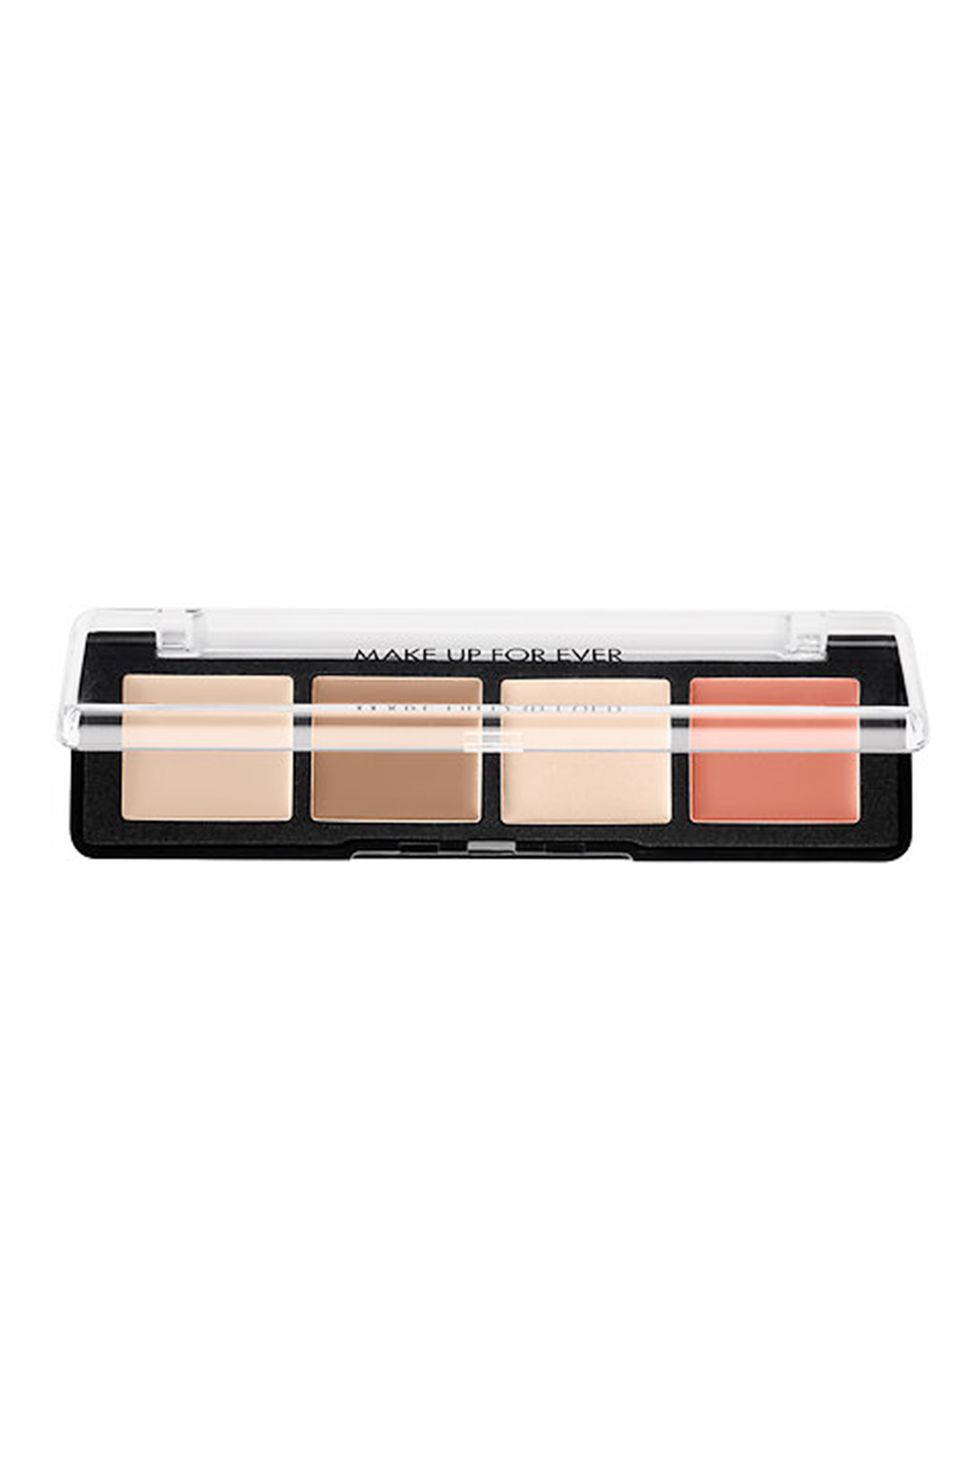 <p>For an all-in-one product, makeup artist Jaleesa Jaikaran–she's worked for everyone from Jeremy Scott to Zac Posen–always reaches for Make Up For Ever's Pro Sculpting Palette. "It's versatile and blends seamlessly into the skin. It's a full look in one palette and it has a color for every skin tone, you can contour, color correct and highlight all in one."</p><p>Makeup Forever Pro Sculpting Palette, $45, <u data-redactor-tag="u"><a href="http://www.sephora.com/pro-sculpting-face-palette-P404776?keyword=Makeup%20Forever%E2%80%99s%20Pro%20Sculpting%20Palette&amp;skuId=1779784&amp;_requestid=58652">Sephora.com</a></u></p>